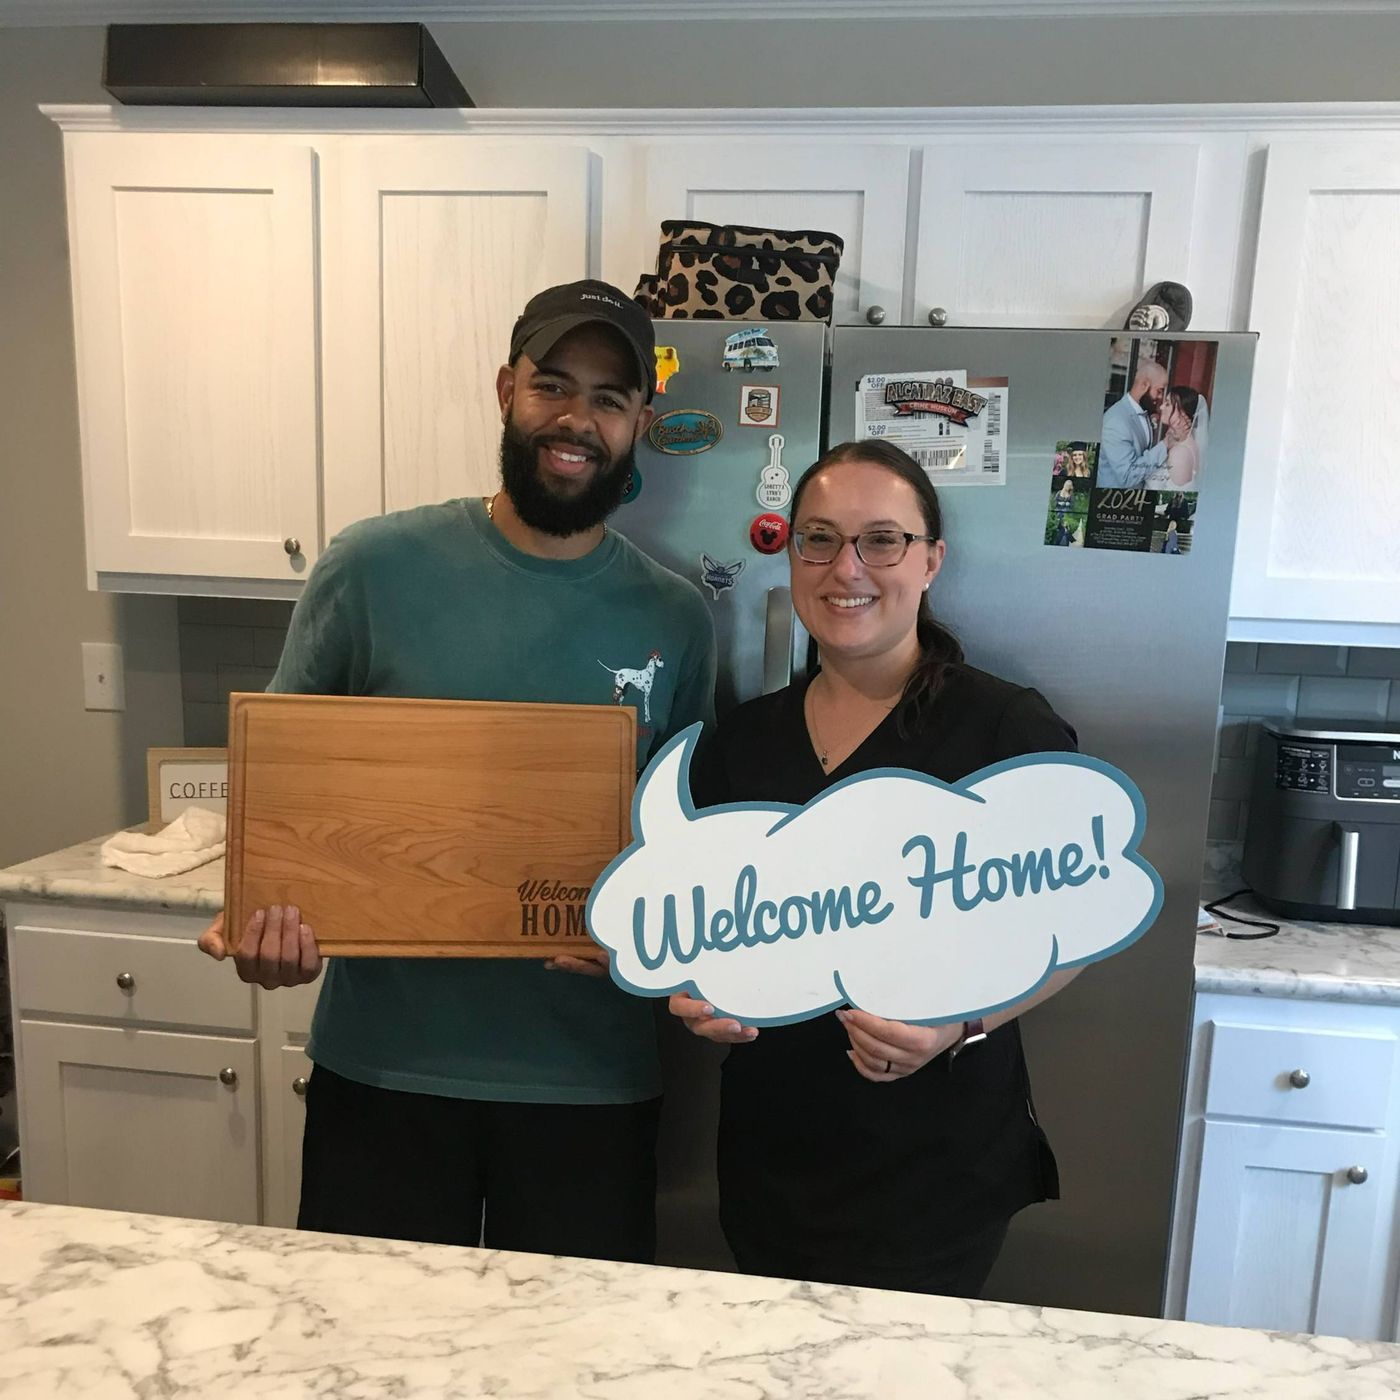 AMBER S. welcome home image